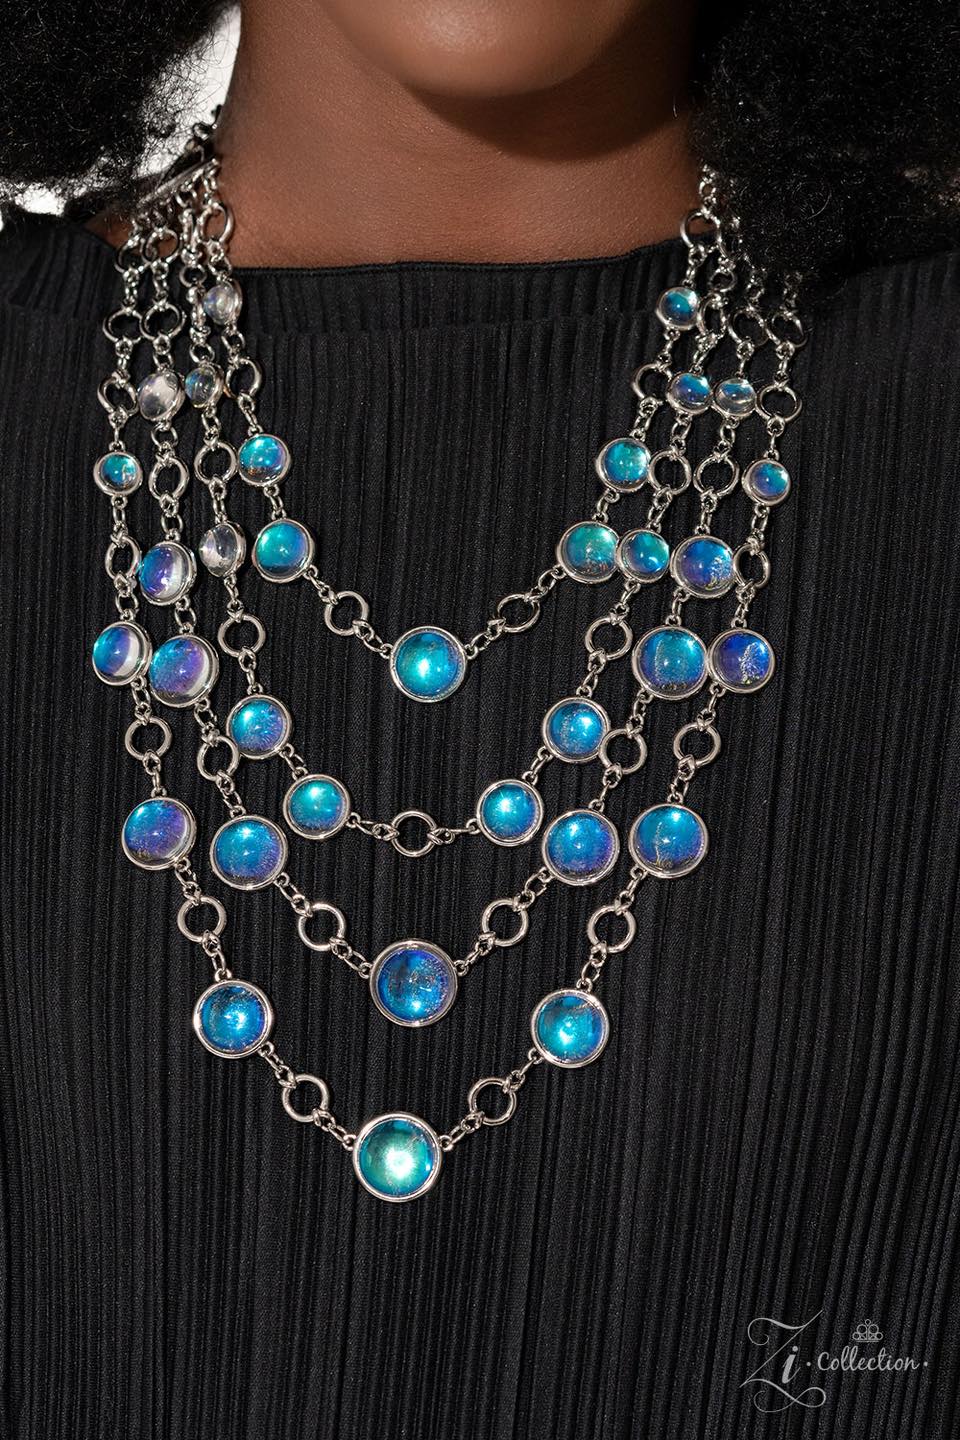 Hypnotic 2023 Zi Collection Necklace - Paparazzi Accessories- lightbox - CarasShop.com - $5 Jewelry by Cara Jewels